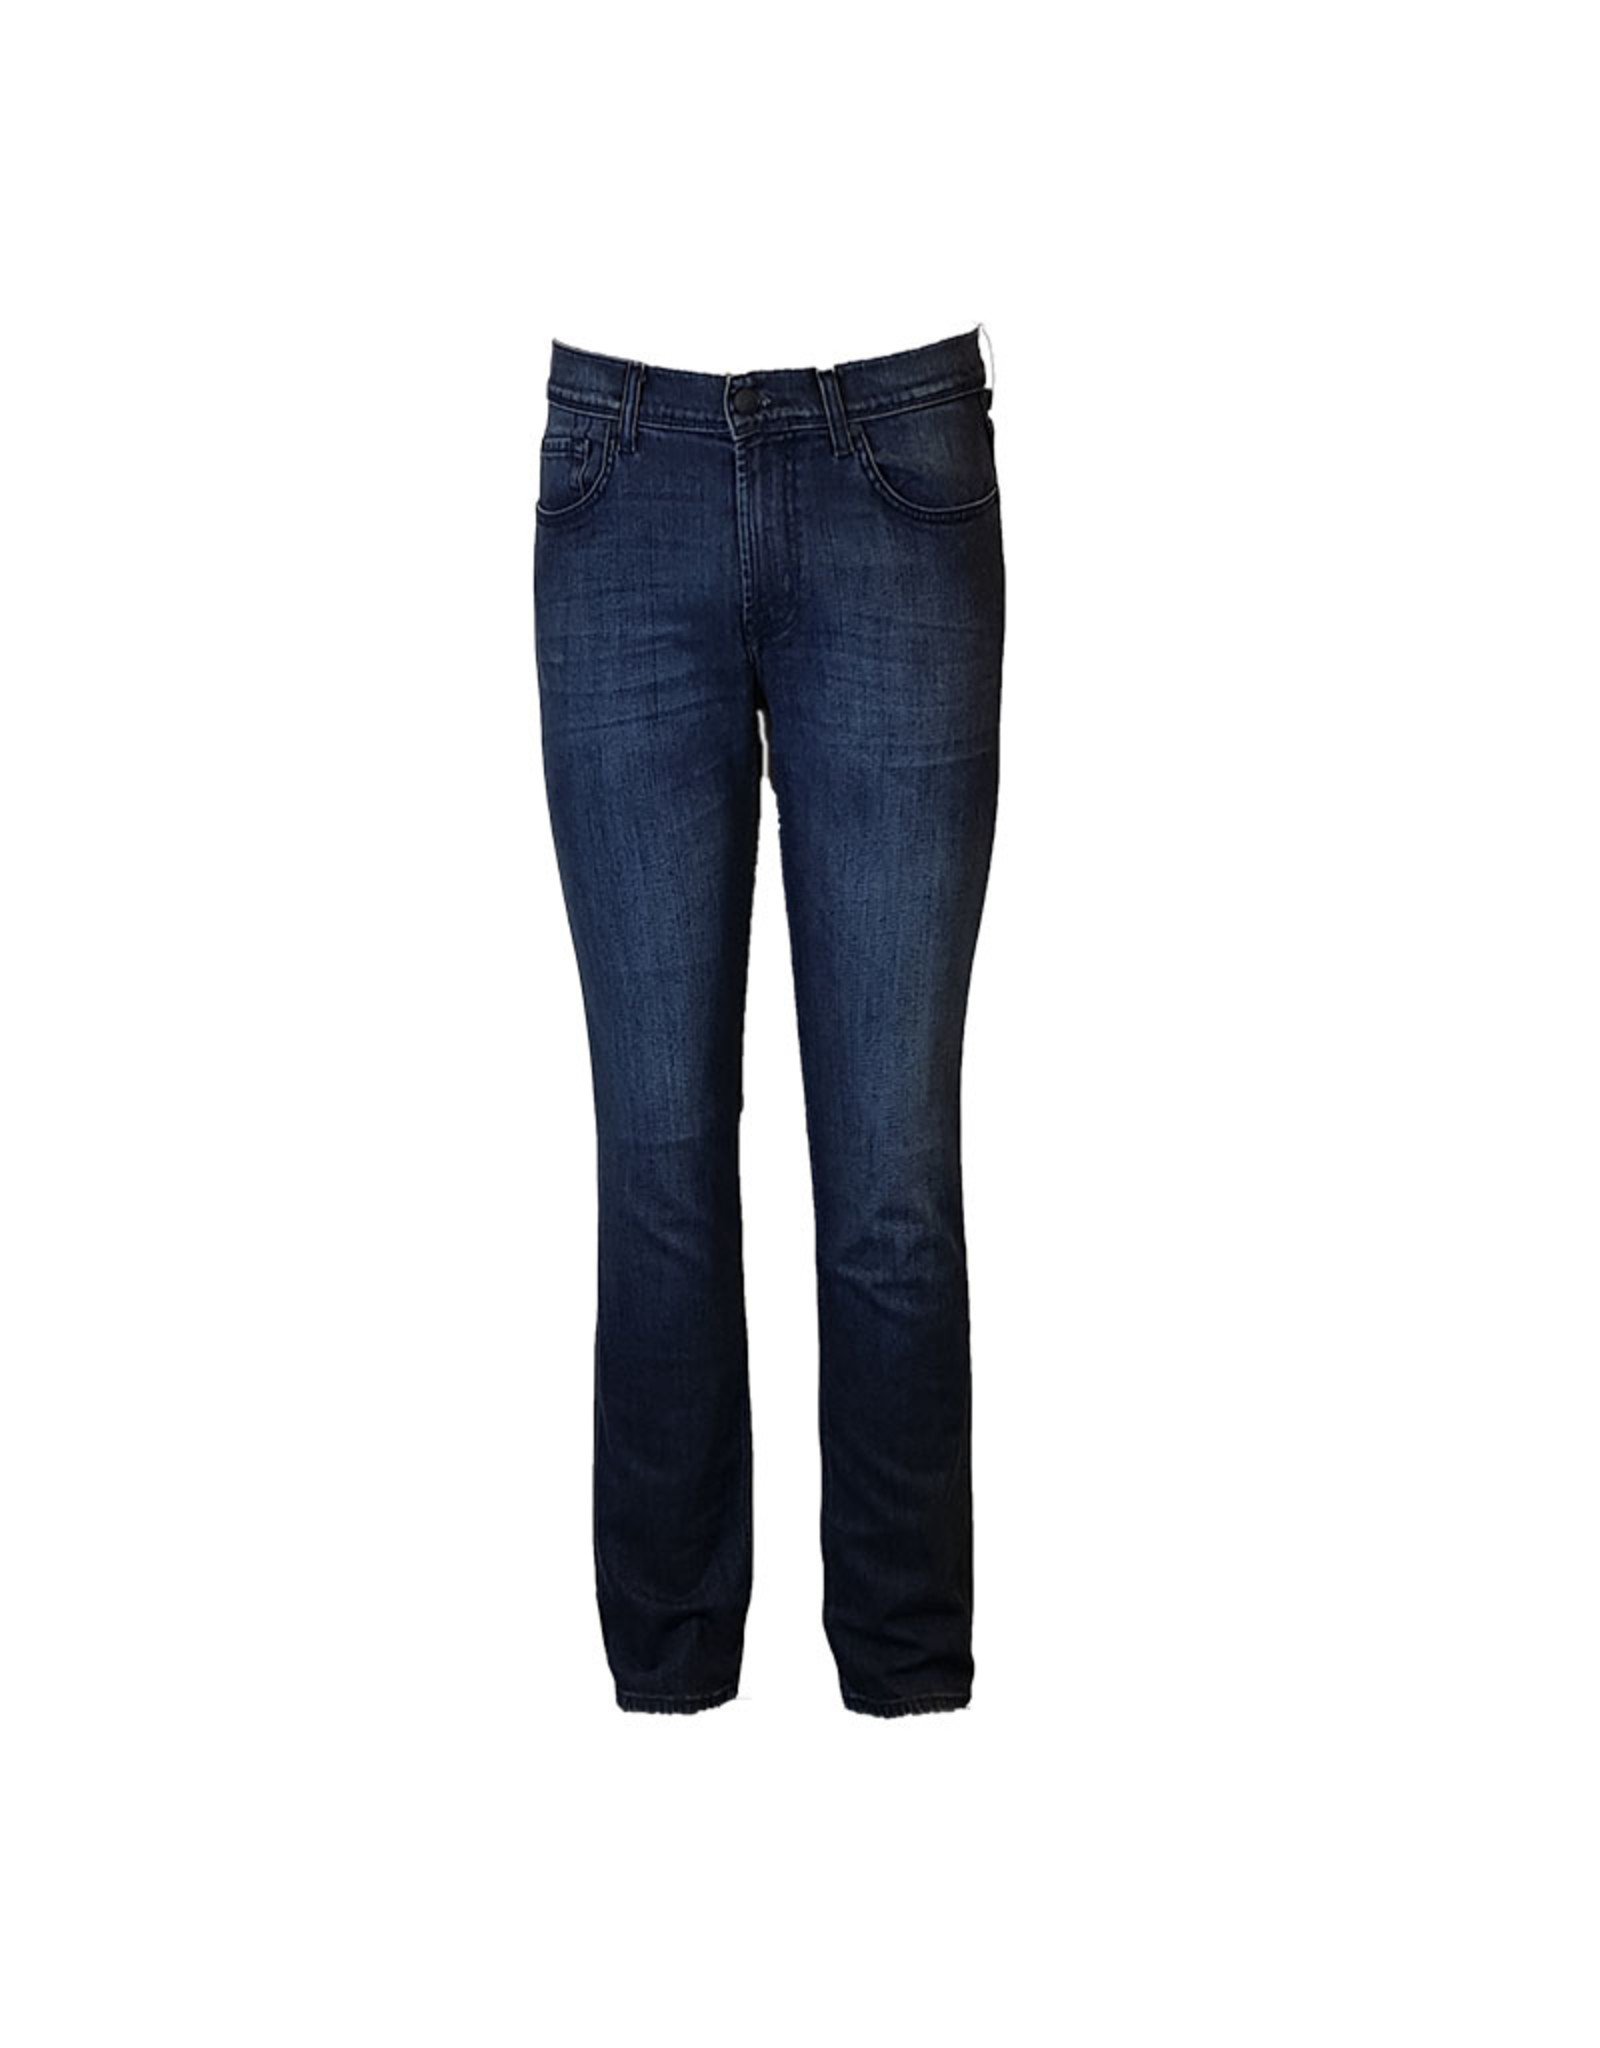 7 For All Mankind 7FAM jeans blauw Slimmy SMSU050AD